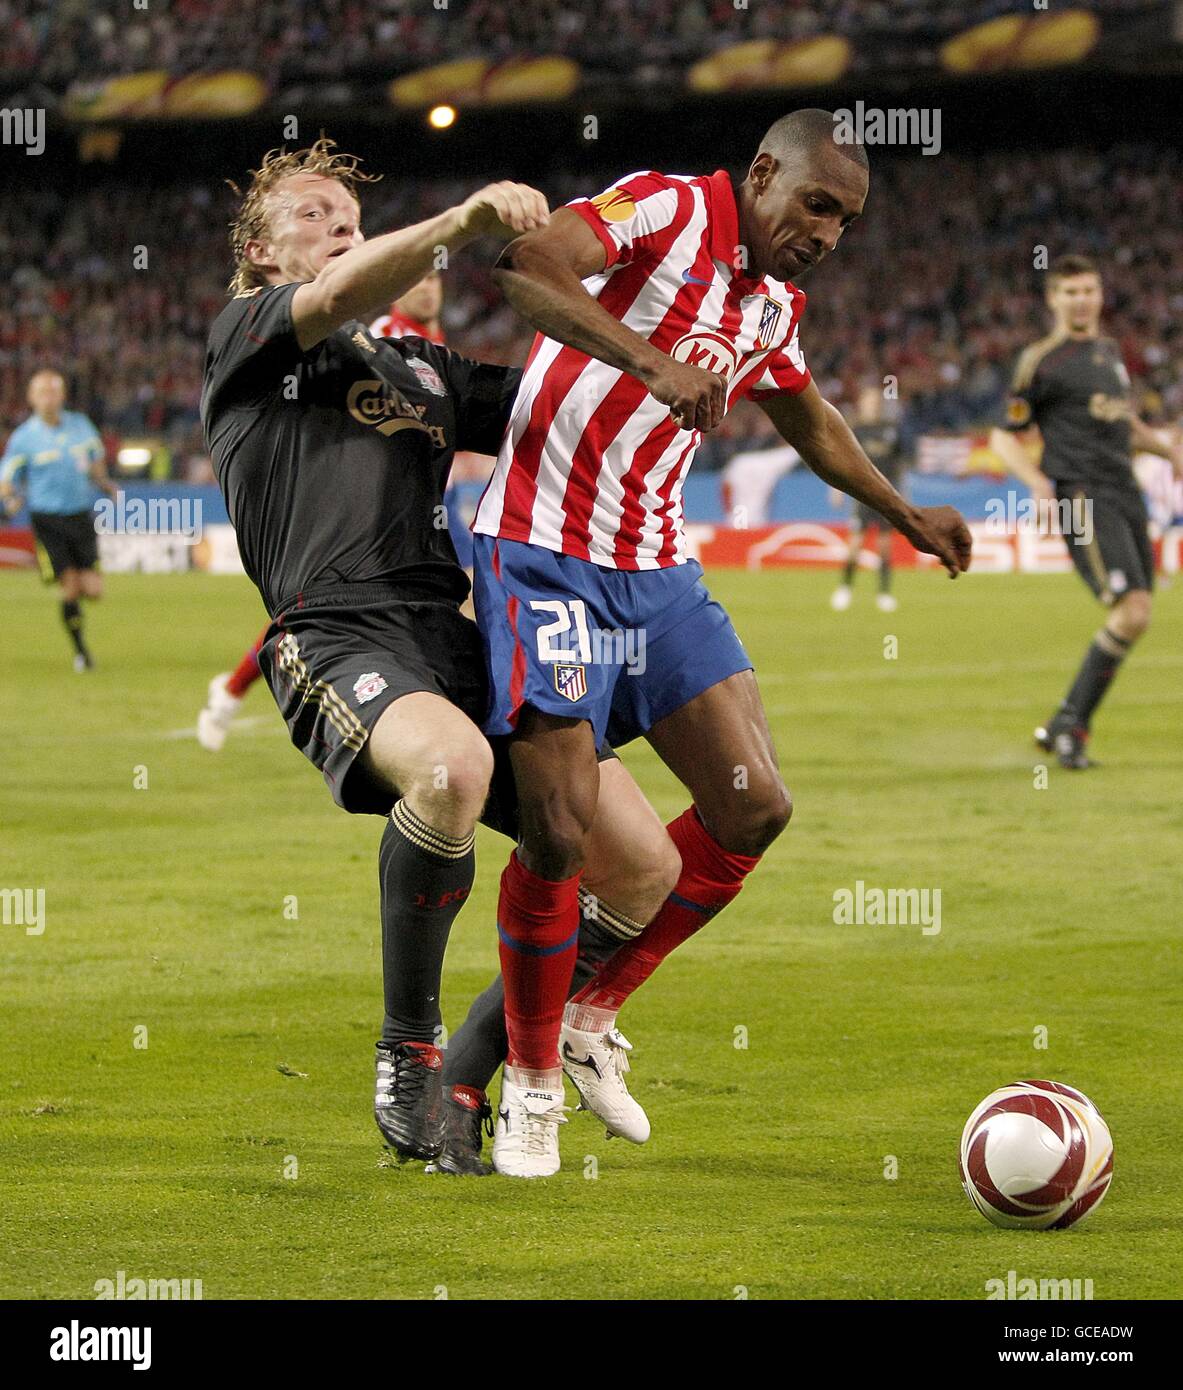 Soccer - UEFA Europa League - Semi Final - First Leg - Atletico Madrid v Liverpool - Vicente Calderon Stadium. Liverpool's Dirk Kuyt (left) is challenged by Atletico Madrid's Luis Amaranto Perea (right) for the ball Stock Photo